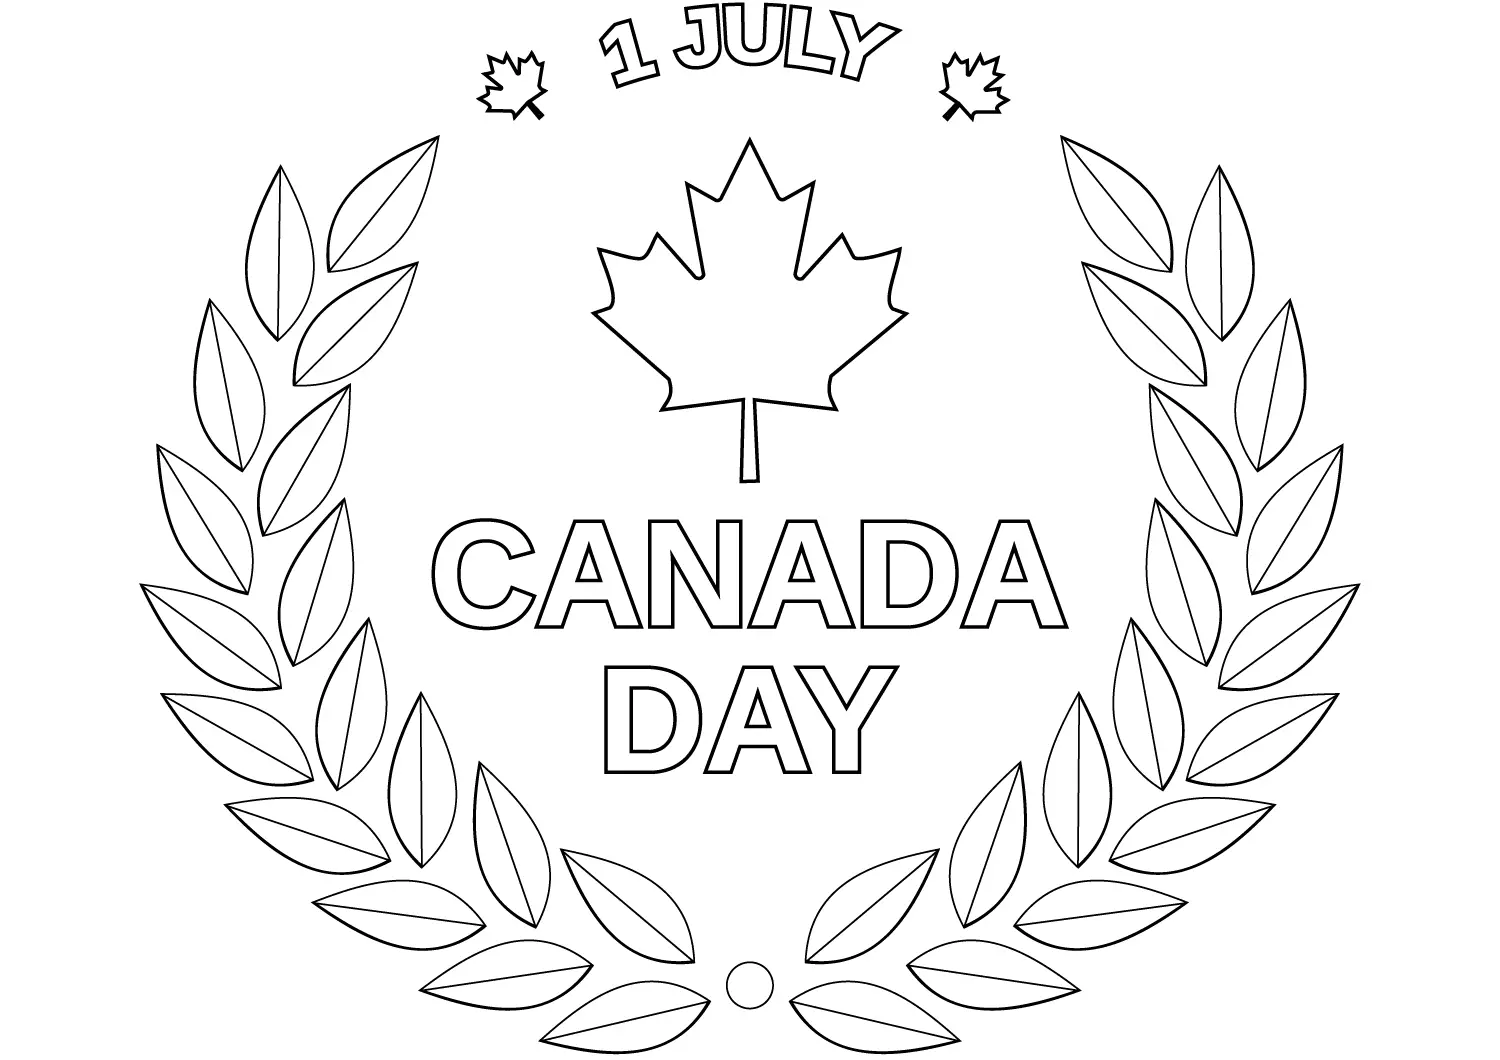 Canada Day Free Clipart Public Domain Coloring Pages Line Art Drawings for Kids-